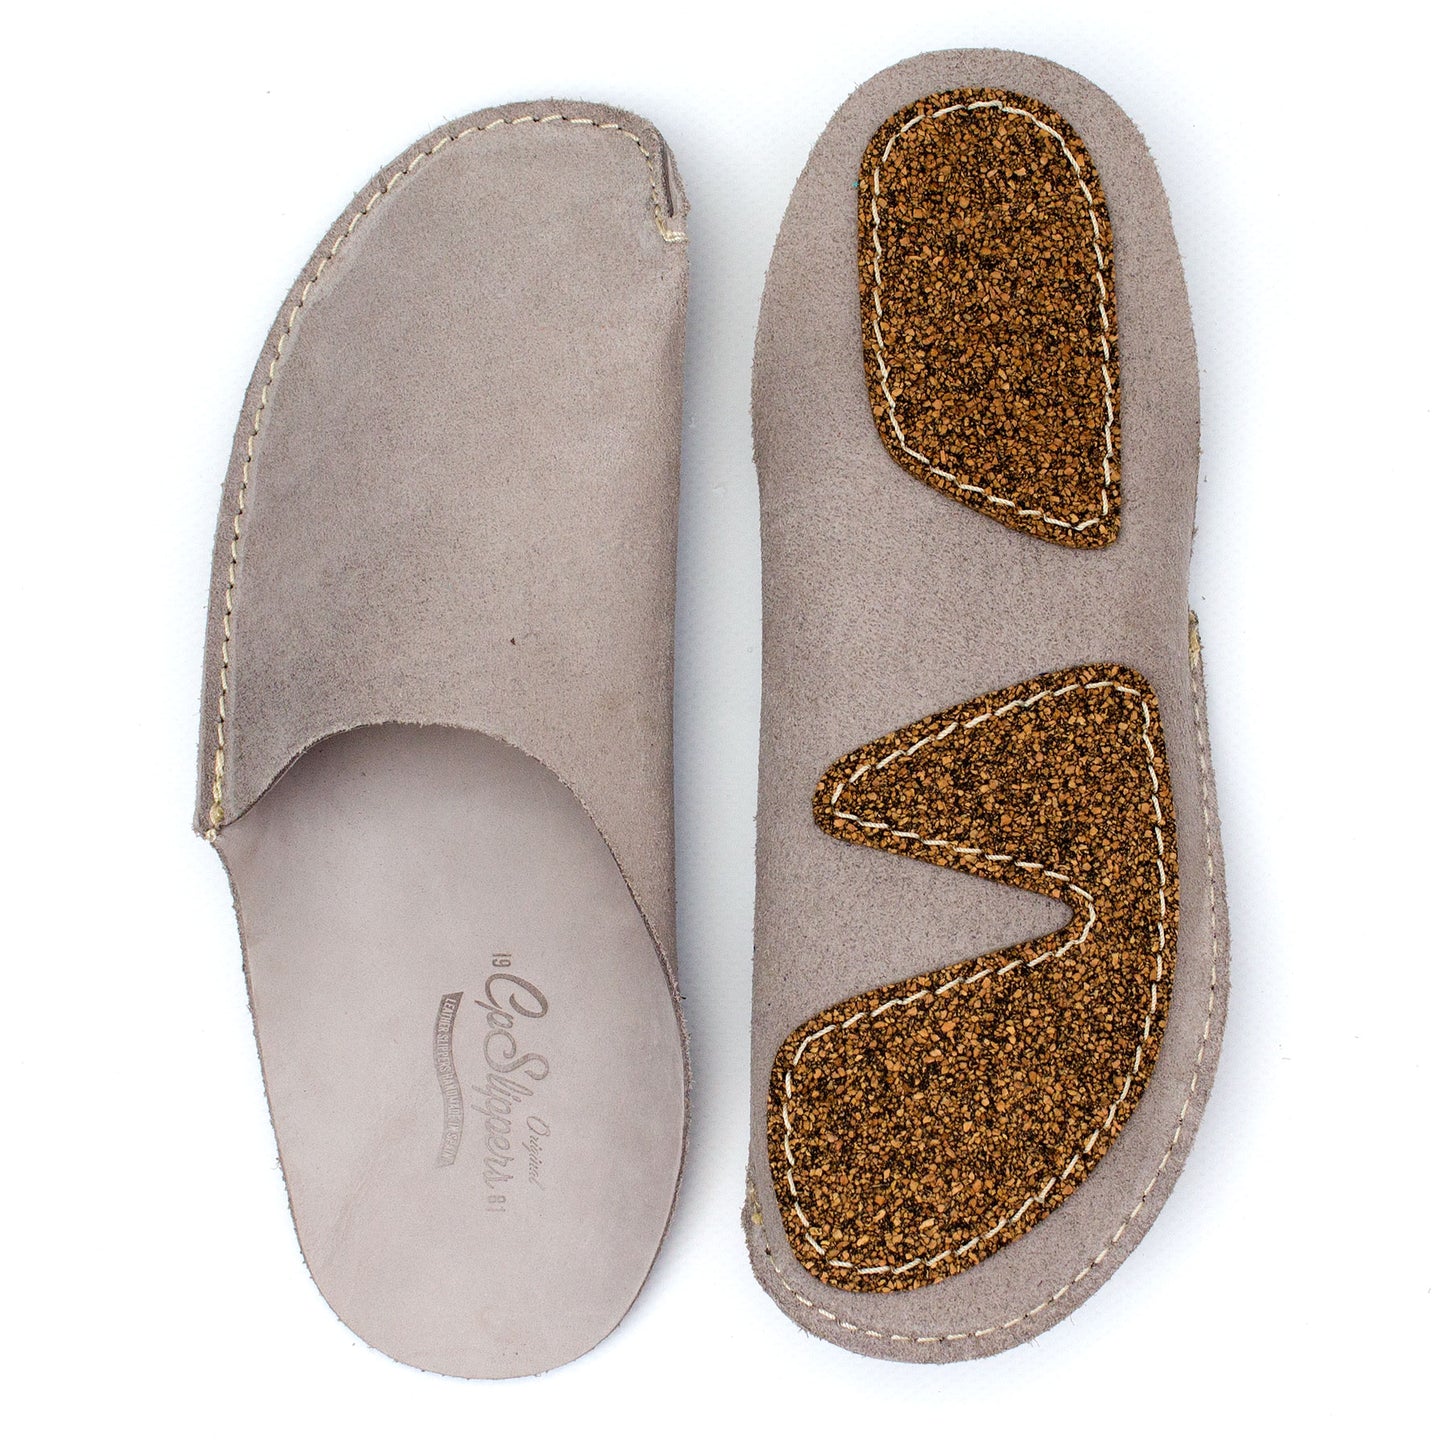 Gray CP Slippers Luxe - CP Slippers